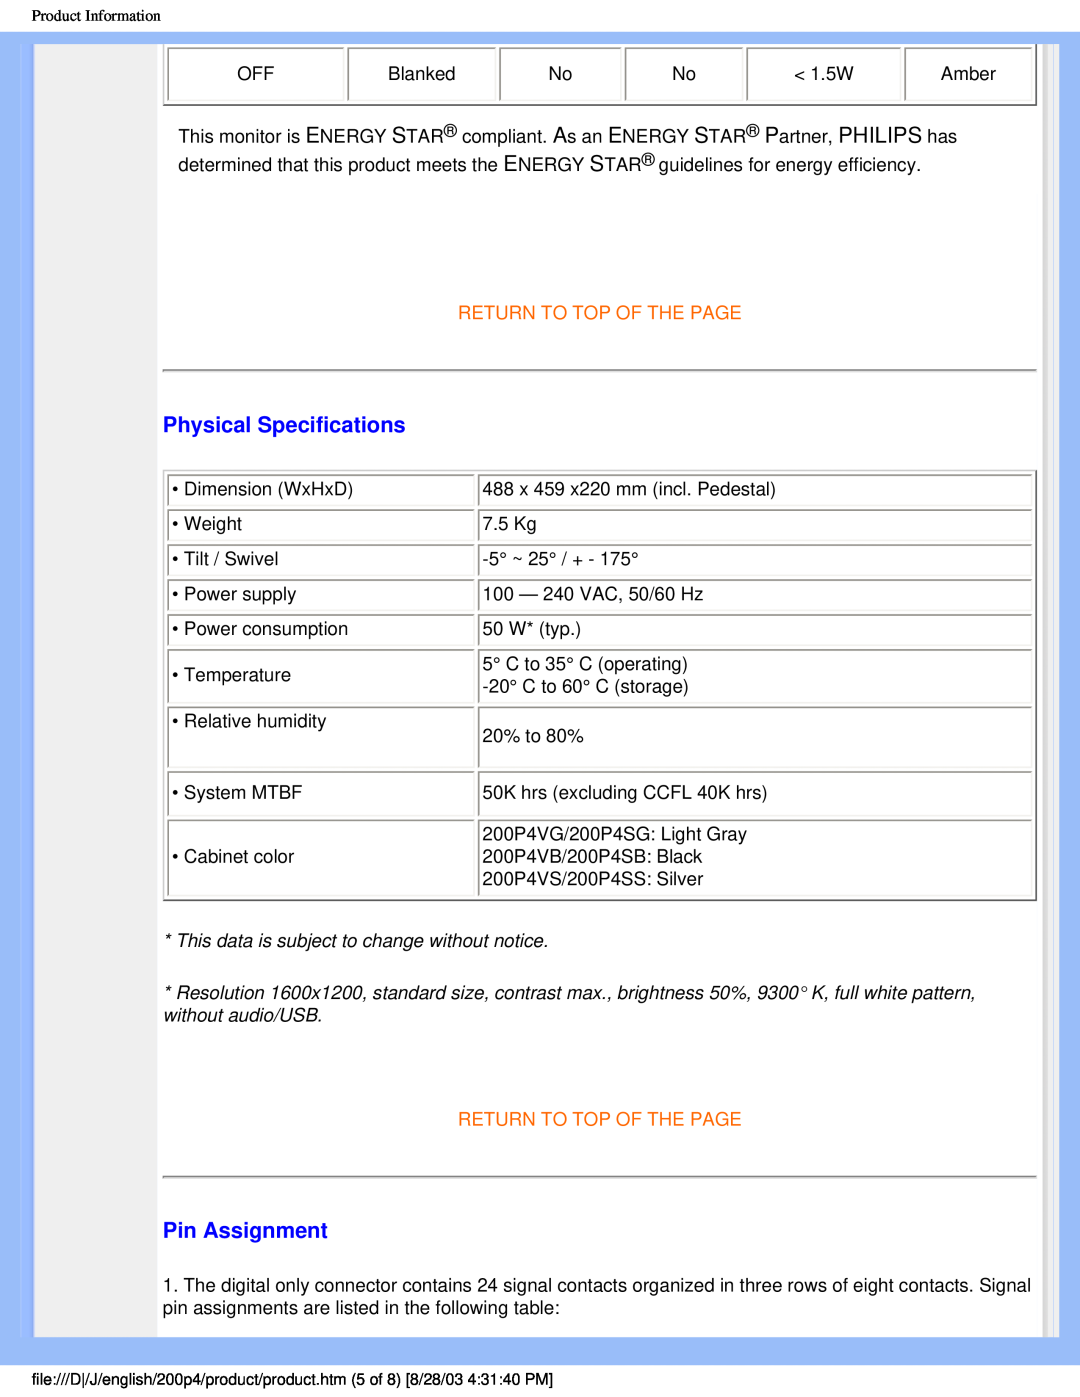 Philips 200P4 user manual Physical Specifications, Pin Assignment, Return To Top Of The Page 